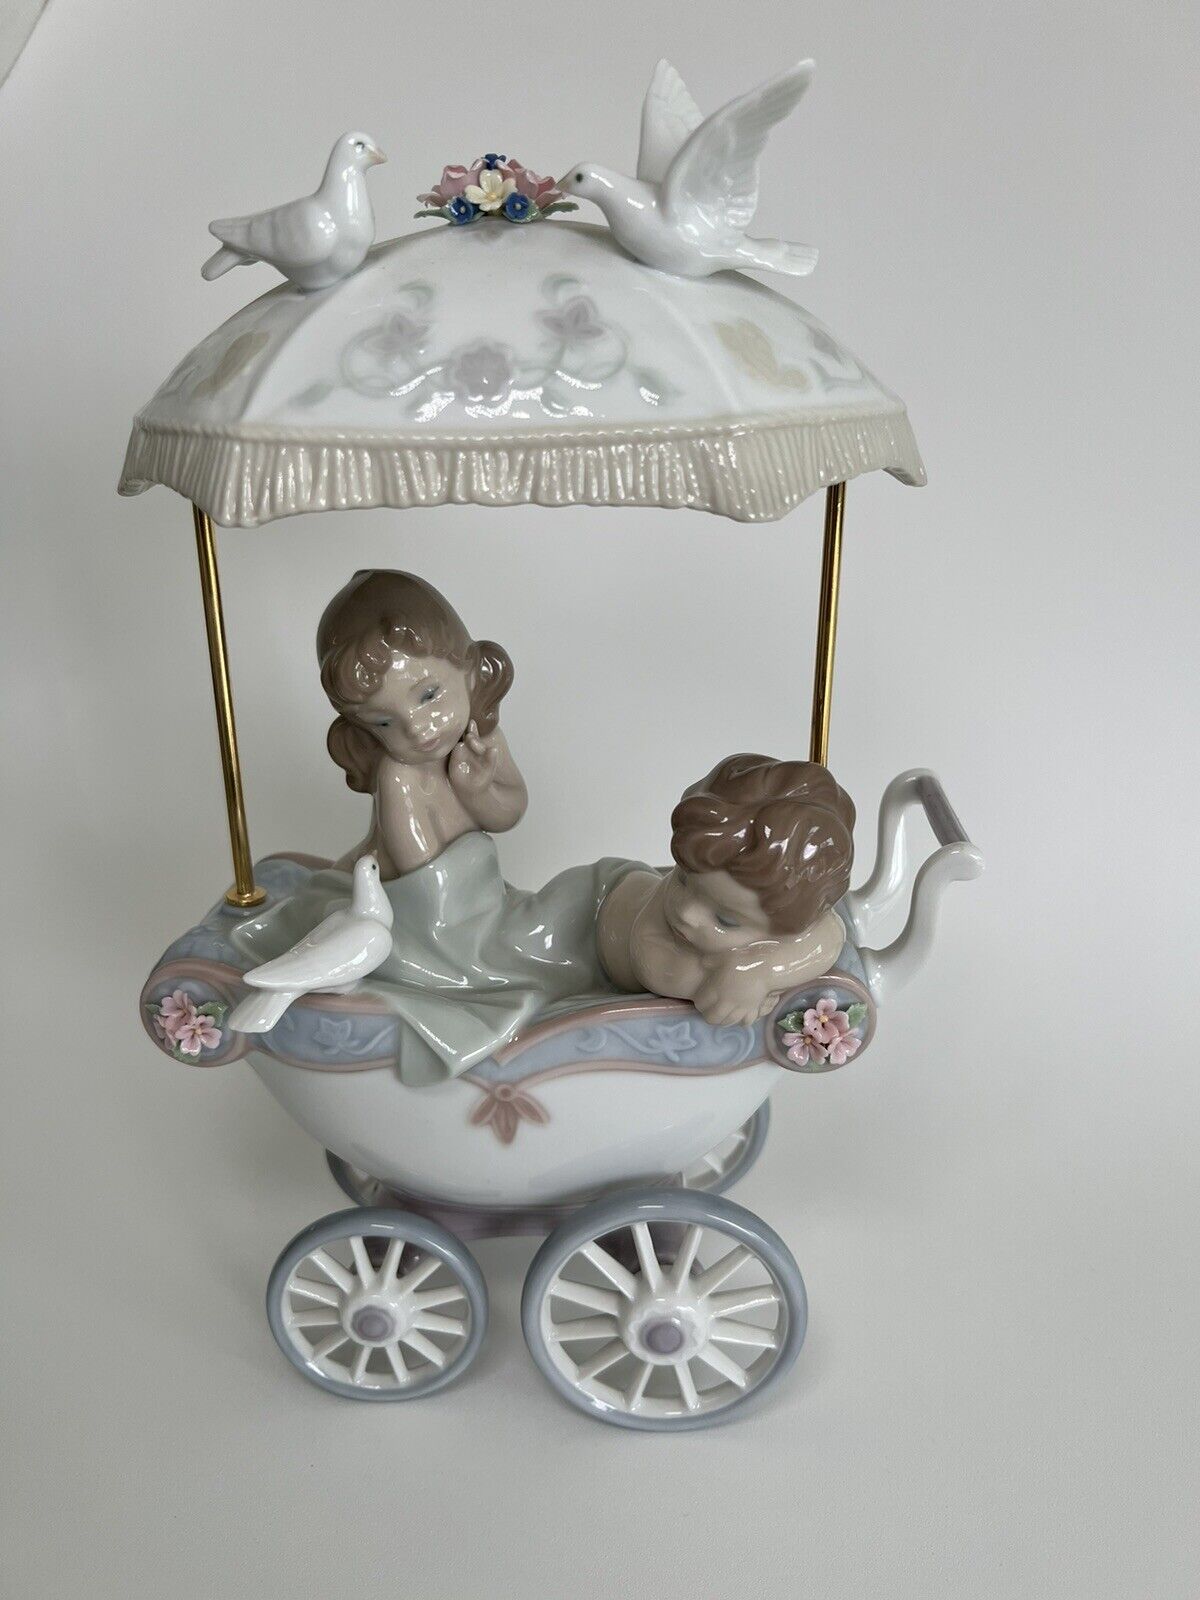 Lladro Shhh...Let Him Sleep Children in a Carriage Large Rare Figurine.